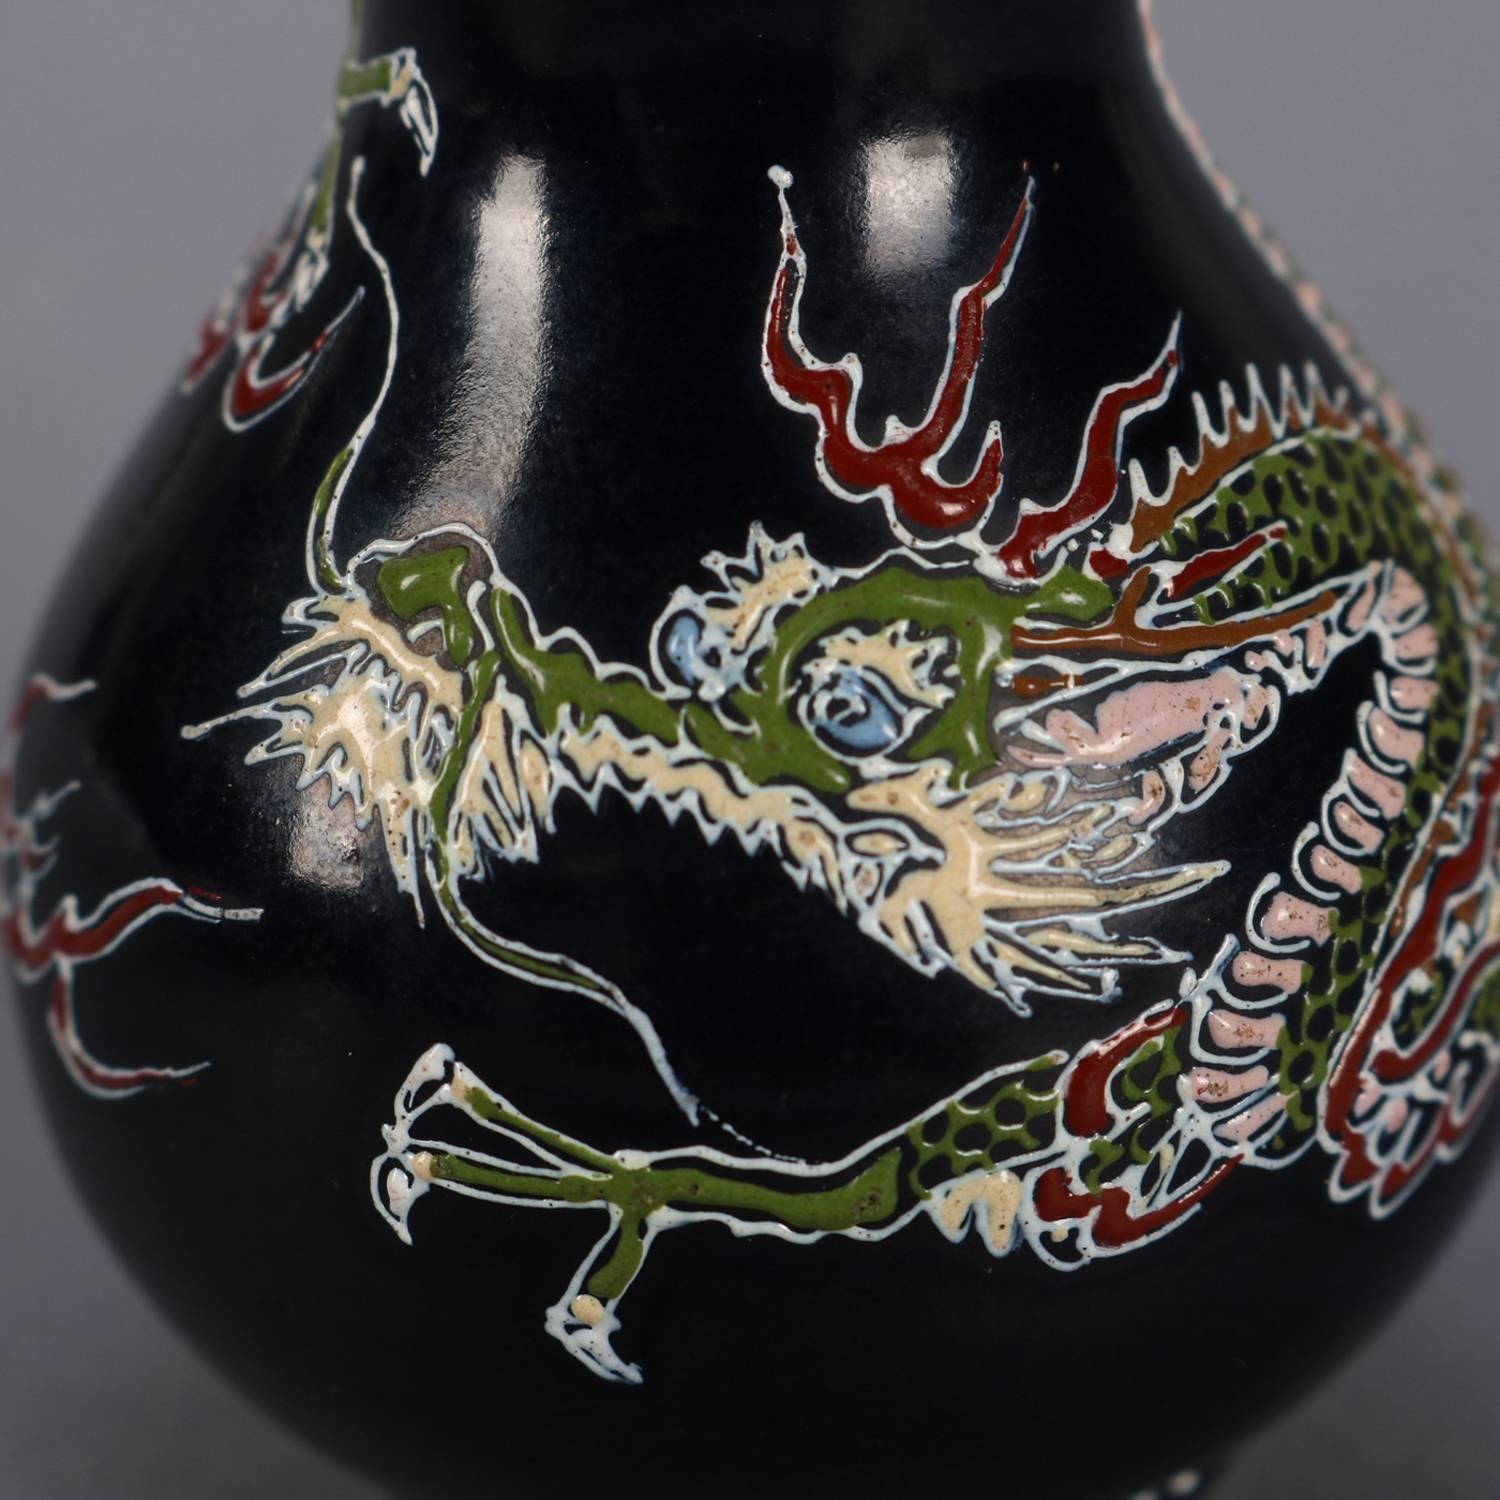 Antique Japanese Imari pottery cabinet vase features hand enameled wrap-around dragon and stylized tobacco leaf collar, signed on base, circa 1900

Measures: 4.5